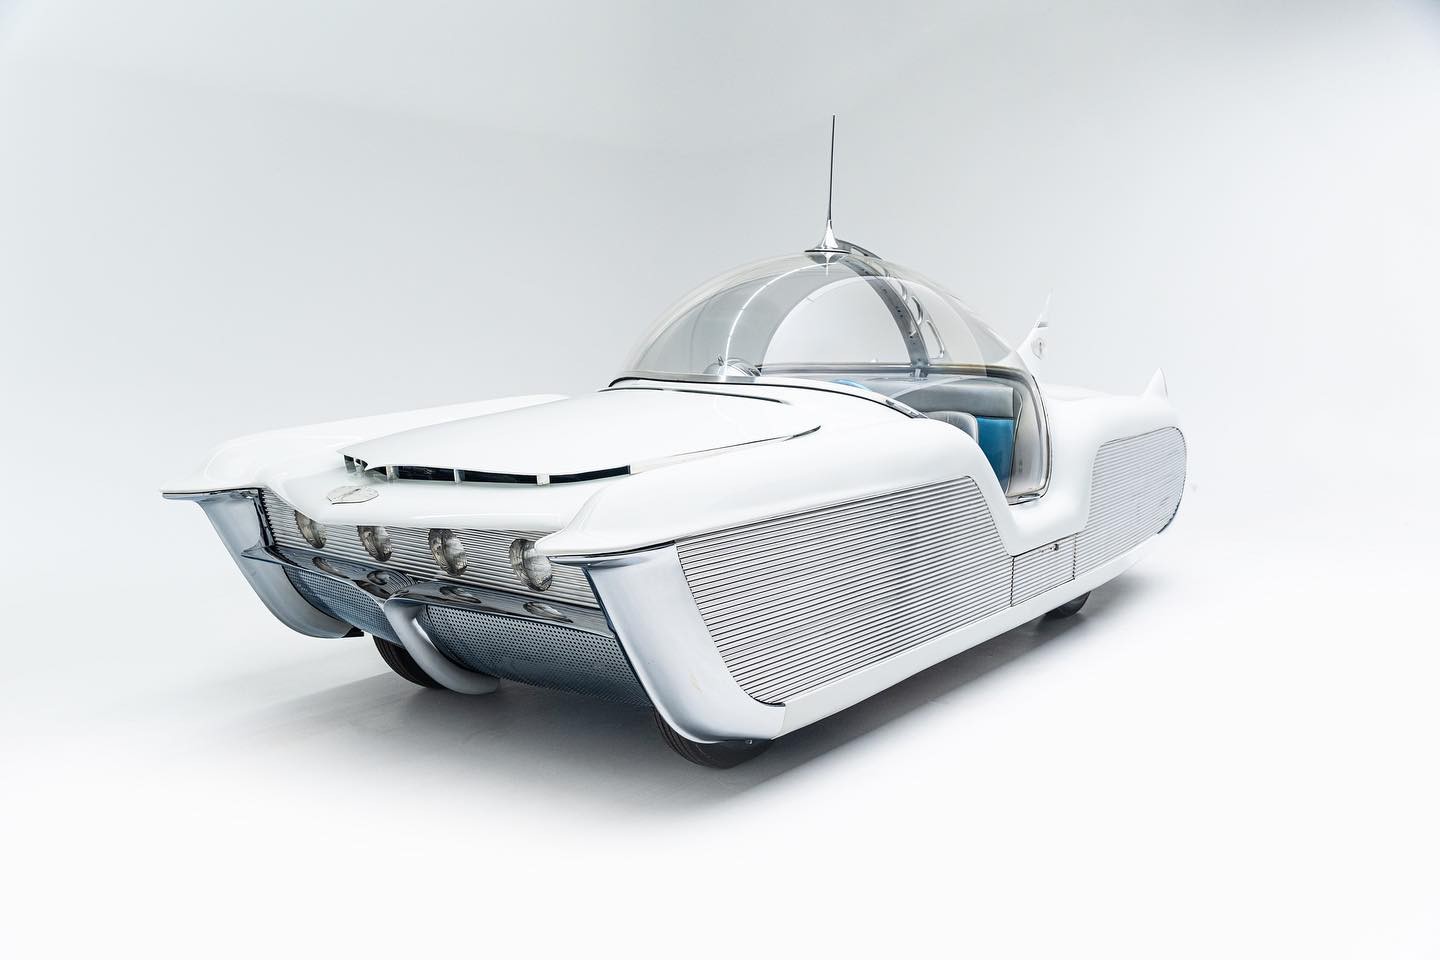 Space Age 1950s Astra-Gnome Concept Car to Appear at the Petersen Automotive Museum